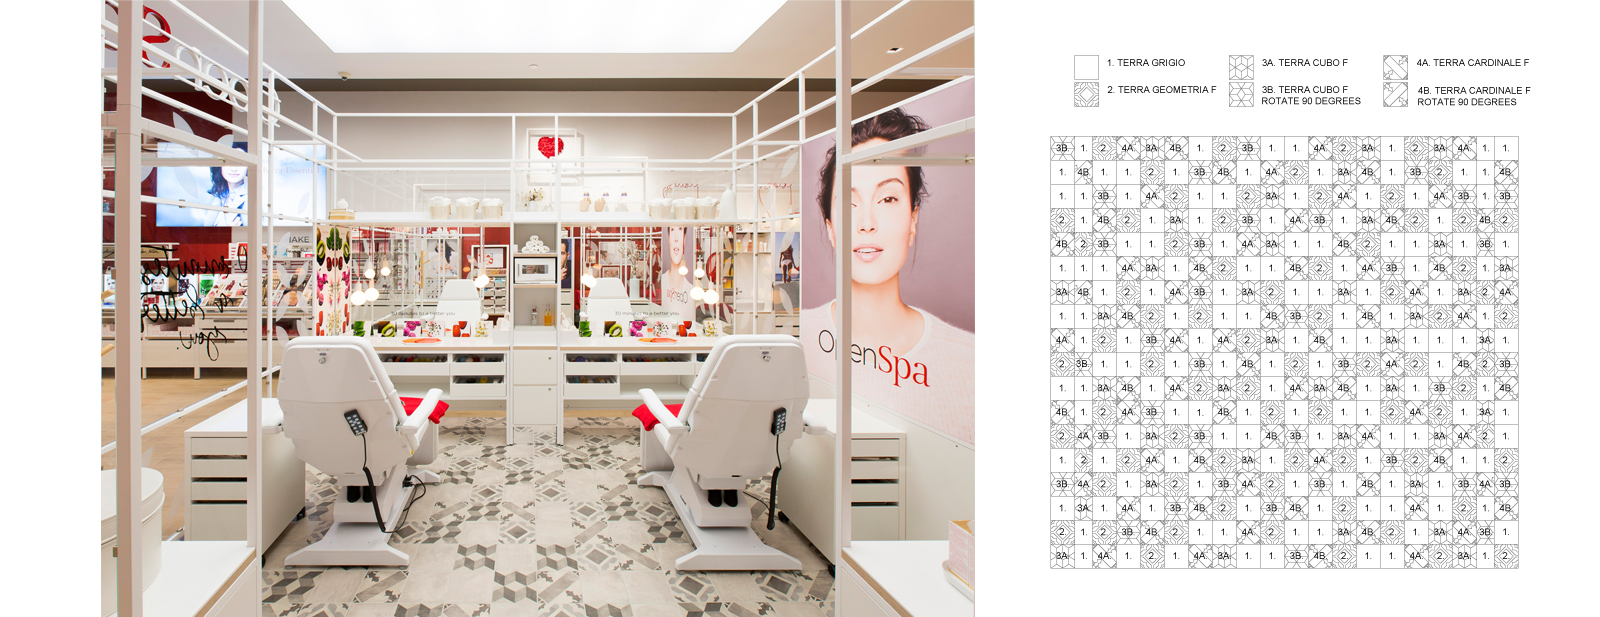 Clarins Flagship Store